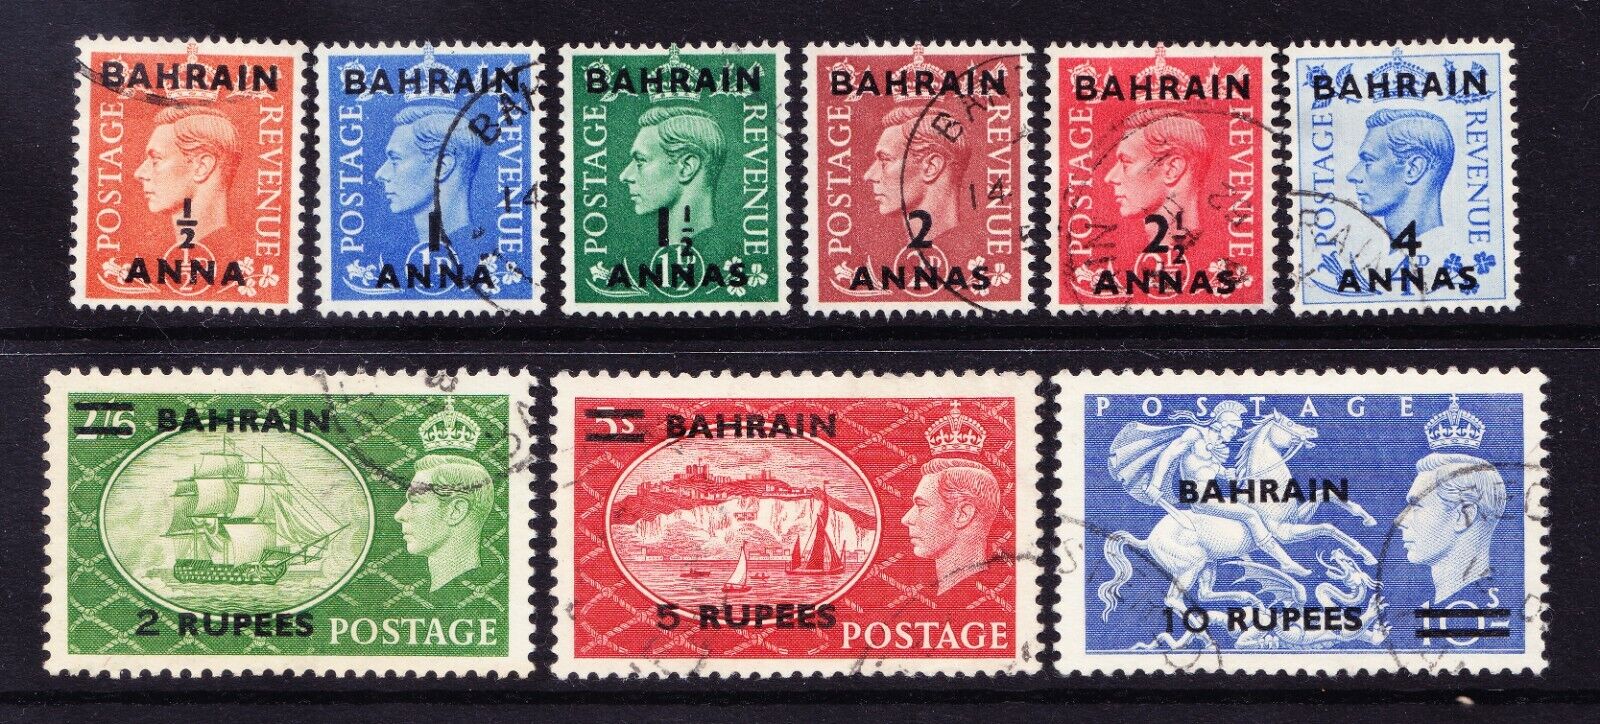 BAHRAIN 1950 SG71/9 set of 9 - Stamps of GB overprinted - very f